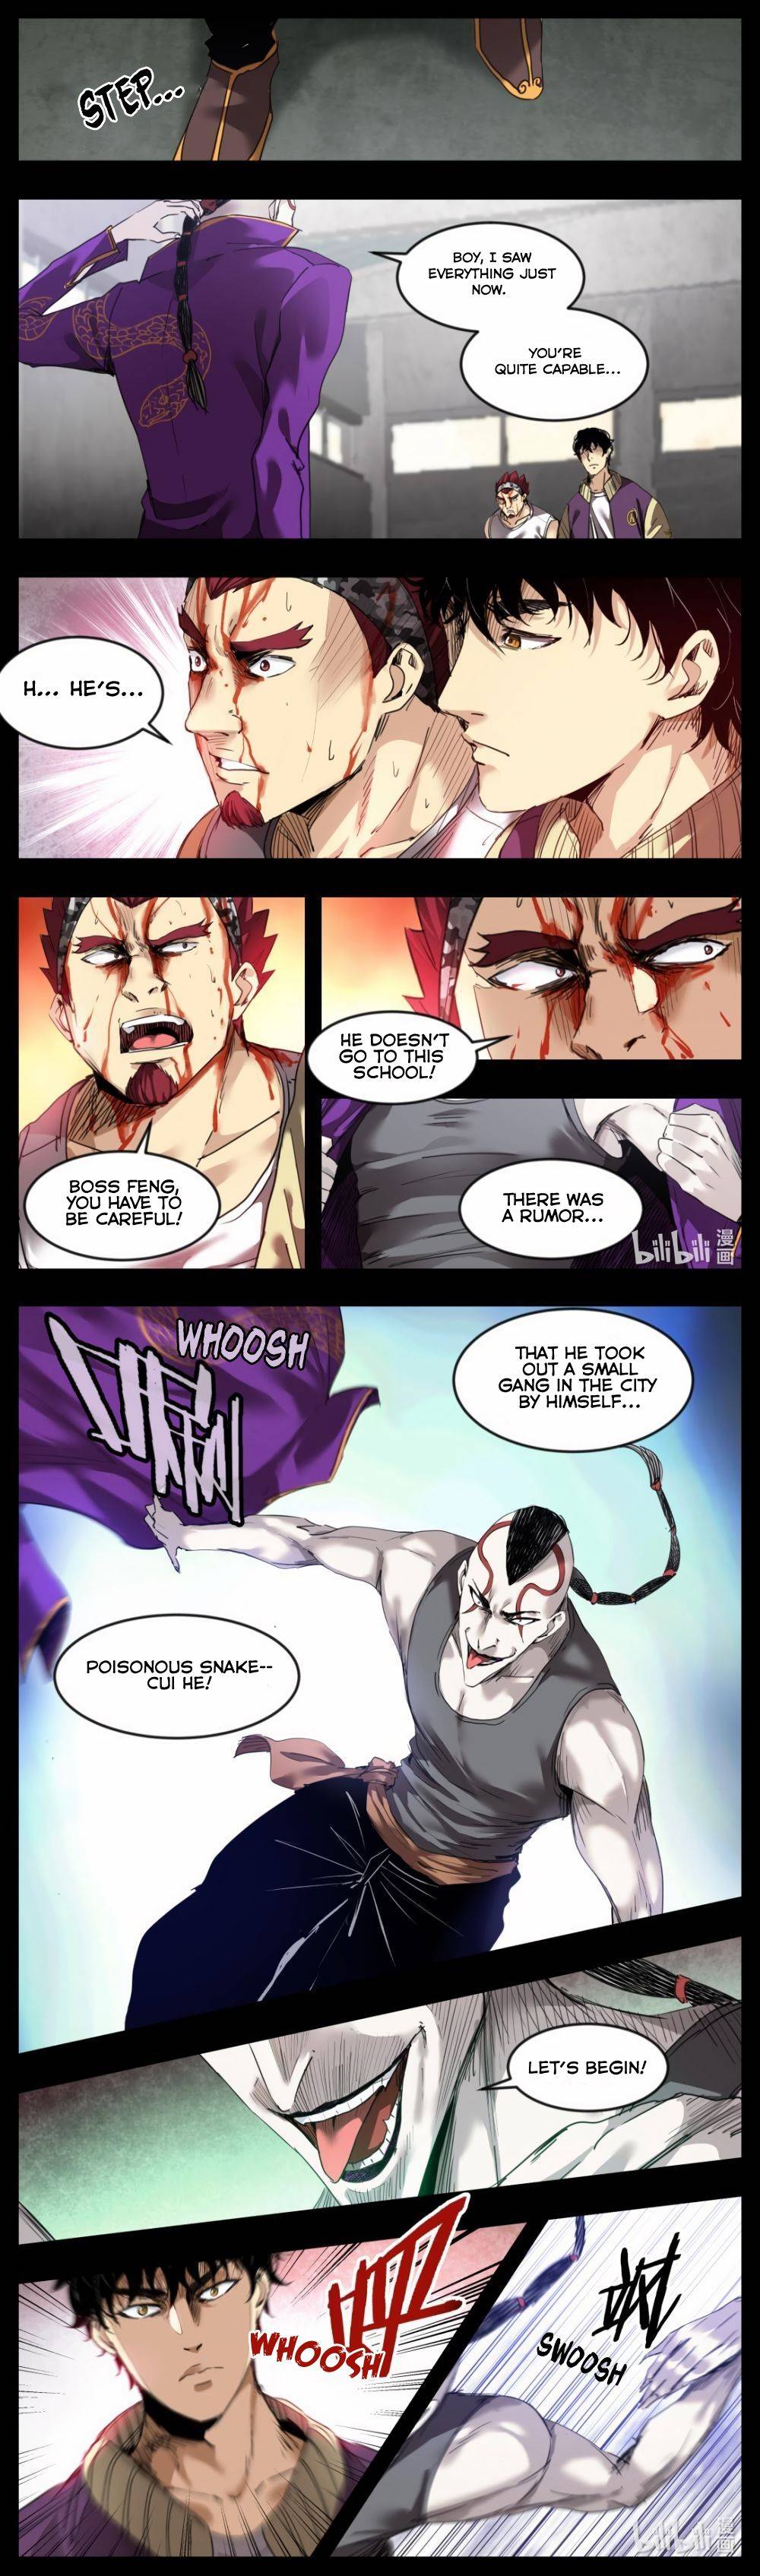 Dexter Attack - Page 2